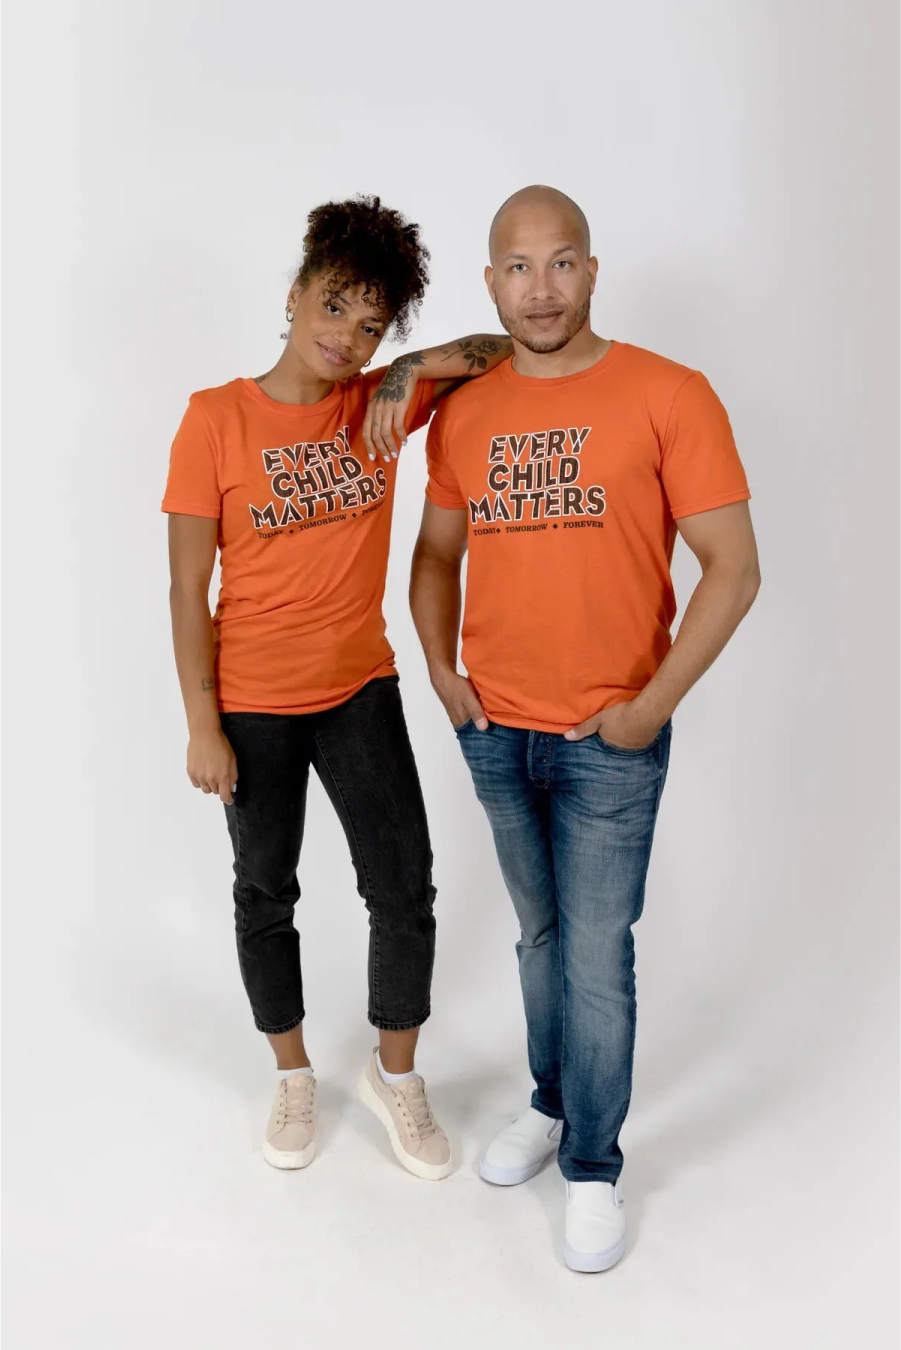 Muin X Stanfield's Adult Orange T-Shirt - Every Child Matters "Quill"